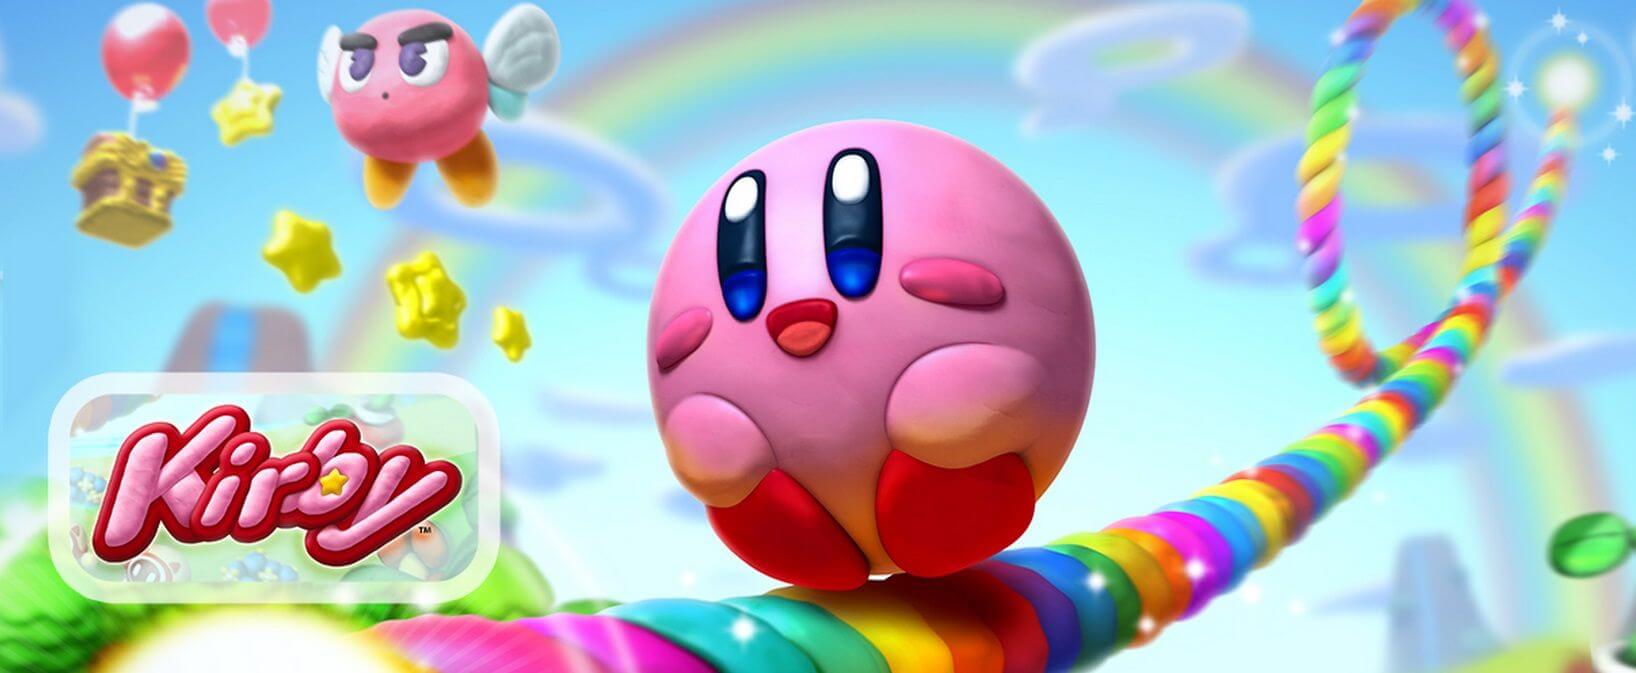 25+ Kirby Wallpapers, Backgrounds, Images, Pictures | Design Trends